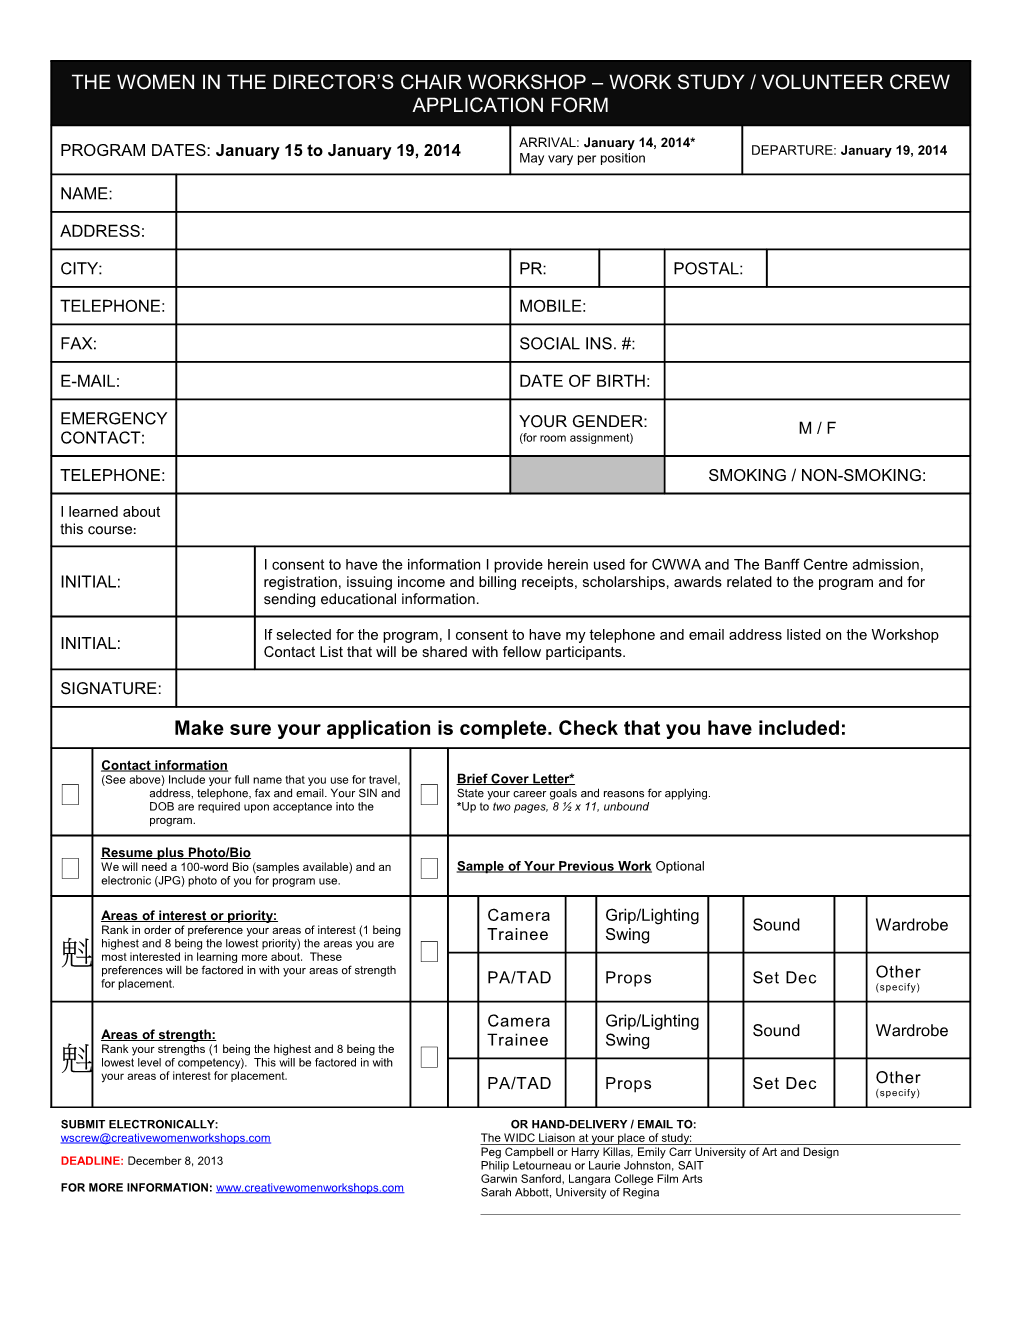 The Women in the Director S Chair Workshop Application Form